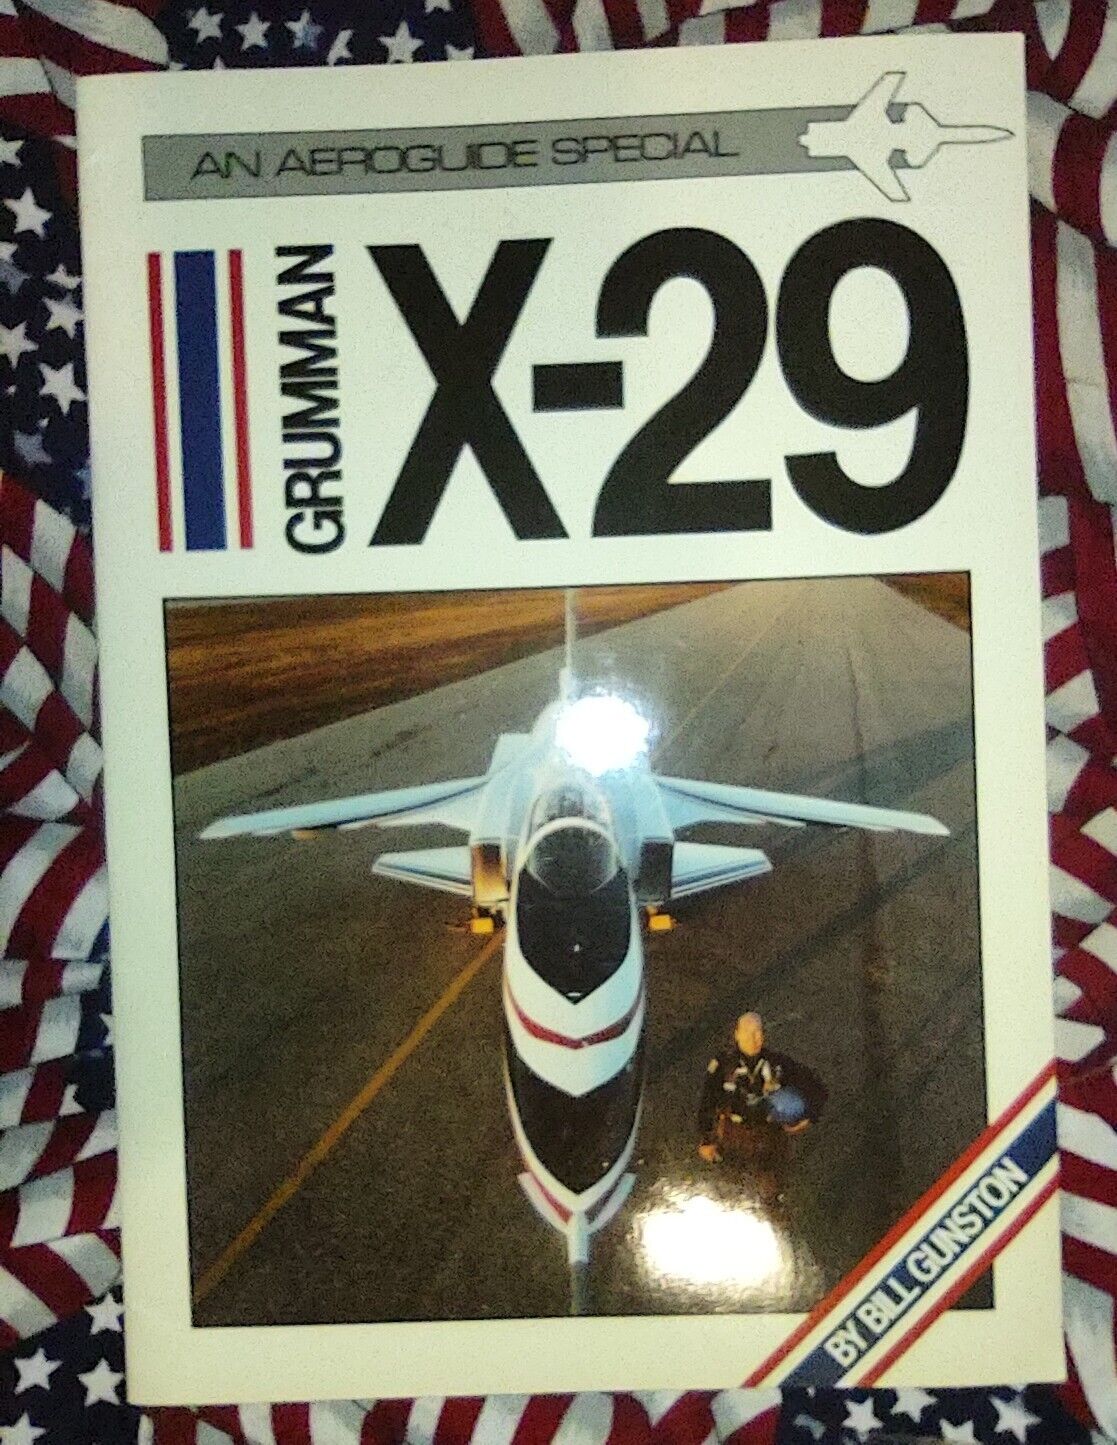 GRUMMAN X-29 BOOKLET CHUCK SEWELL CHIEF TEST PILOT ON THE COVER.  1985.